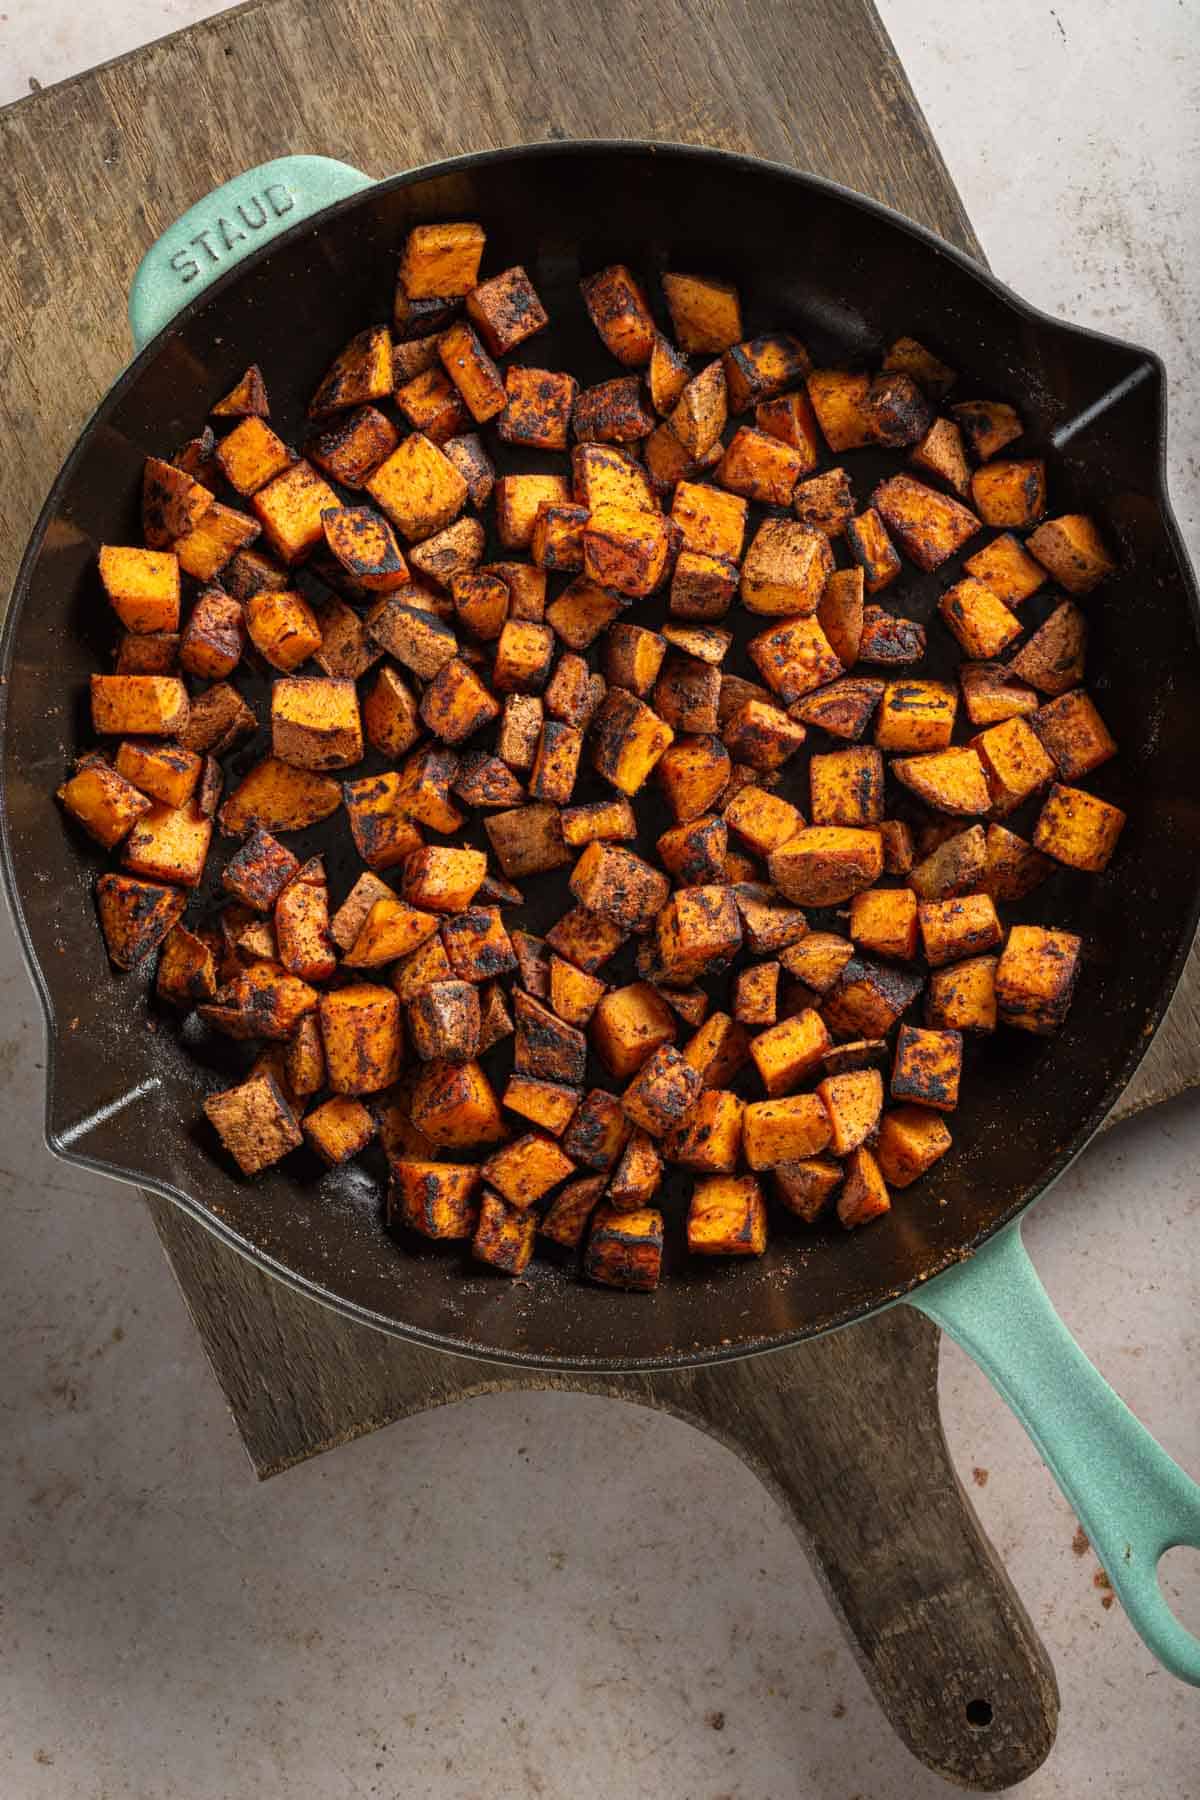 Sautéed sweet potatoes in a skillet.